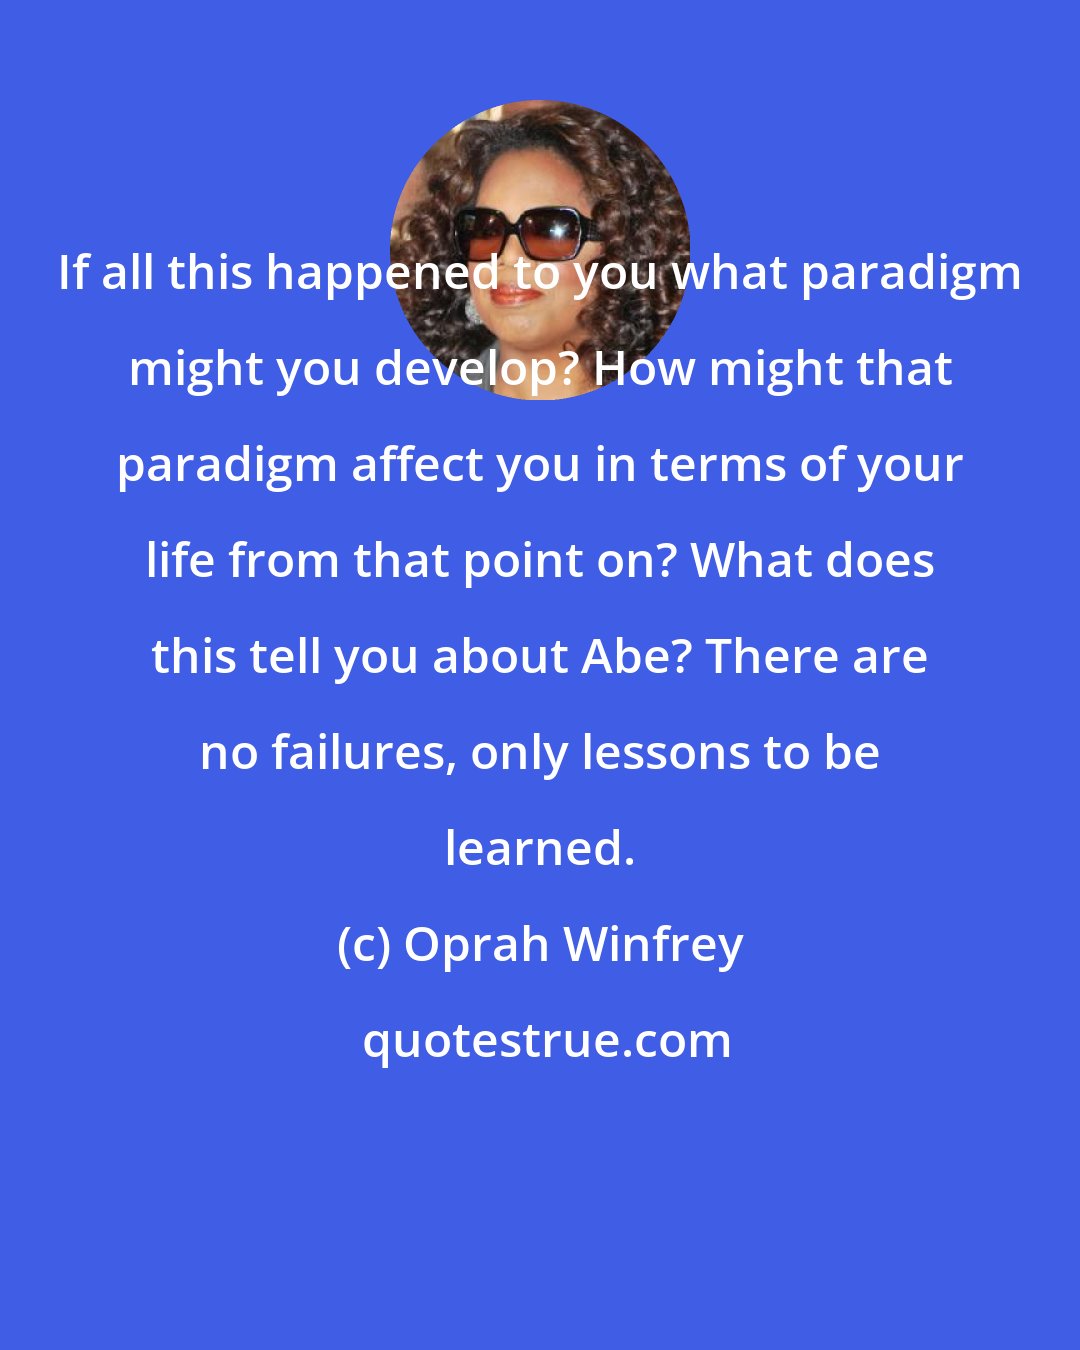 Oprah Winfrey: If all this happened to you what paradigm might you develop? How might that paradigm affect you in terms of your life from that point on? What does this tell you about Abe? There are no failures, only lessons to be learned.